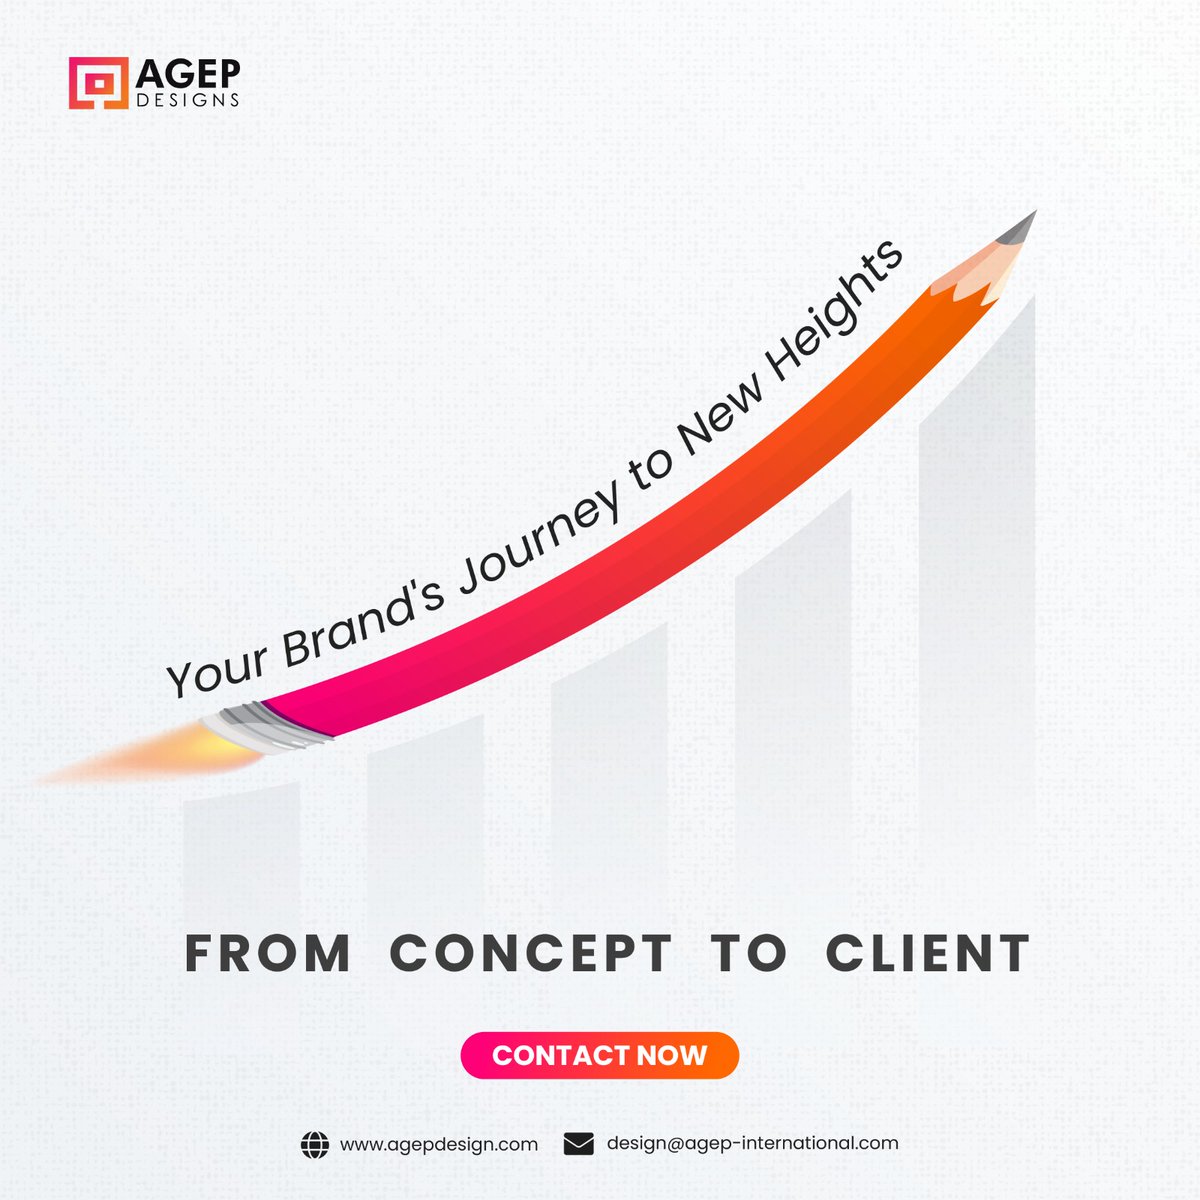 Embark on your brand's journey to new heights with AGEP Designs by your side! 🚀 From concept to client, we've got everything you need to soar. 
#AGEPDesigns #BrandJourney #ConceptToClient #BrandPartnership #DesignExcellence #CreativeSolutions #InnovationInDesign